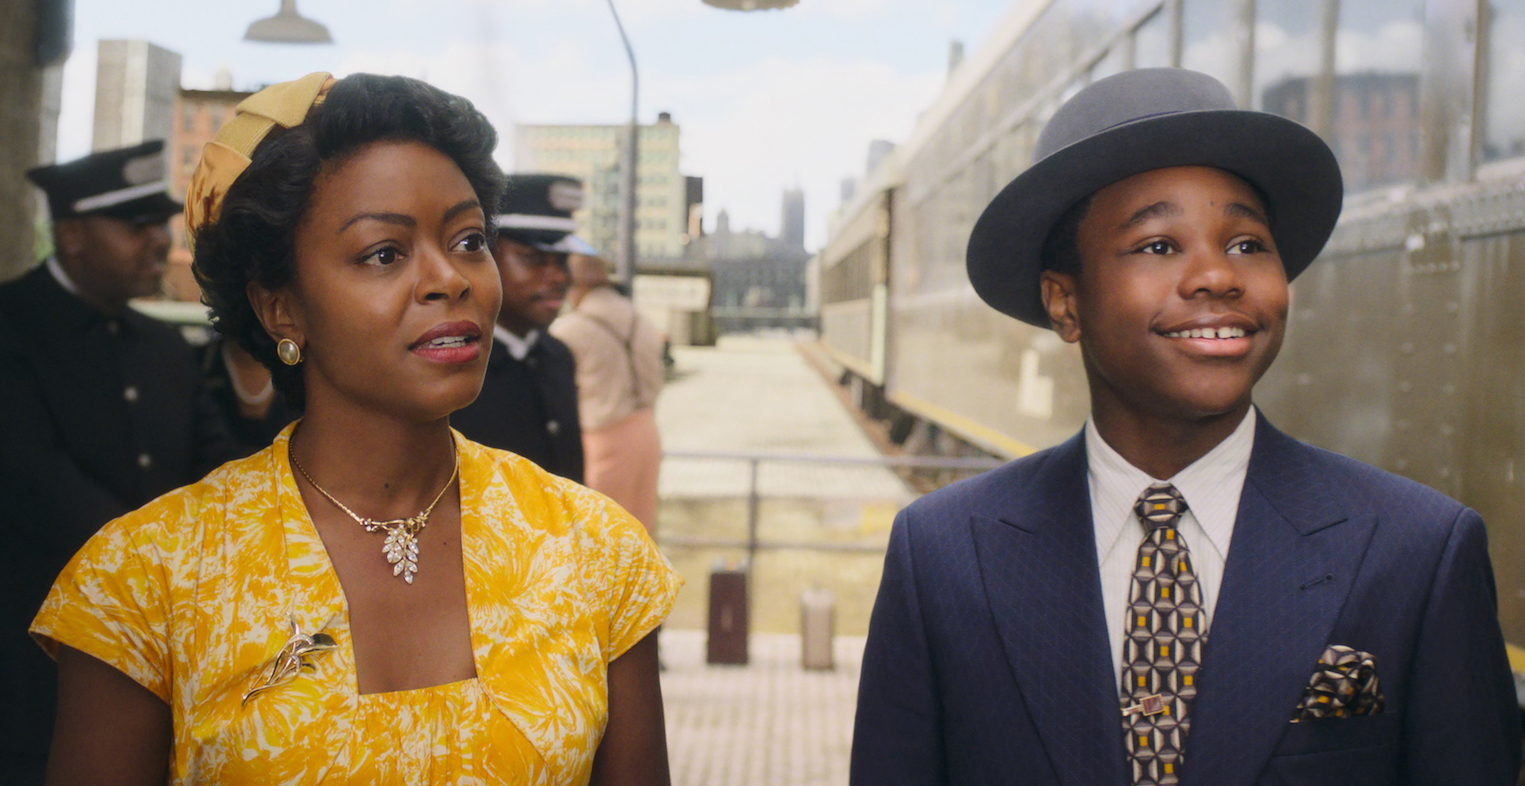 A mother in a yellow dress and her son, in a blue suit and fedora stand on a train platform.